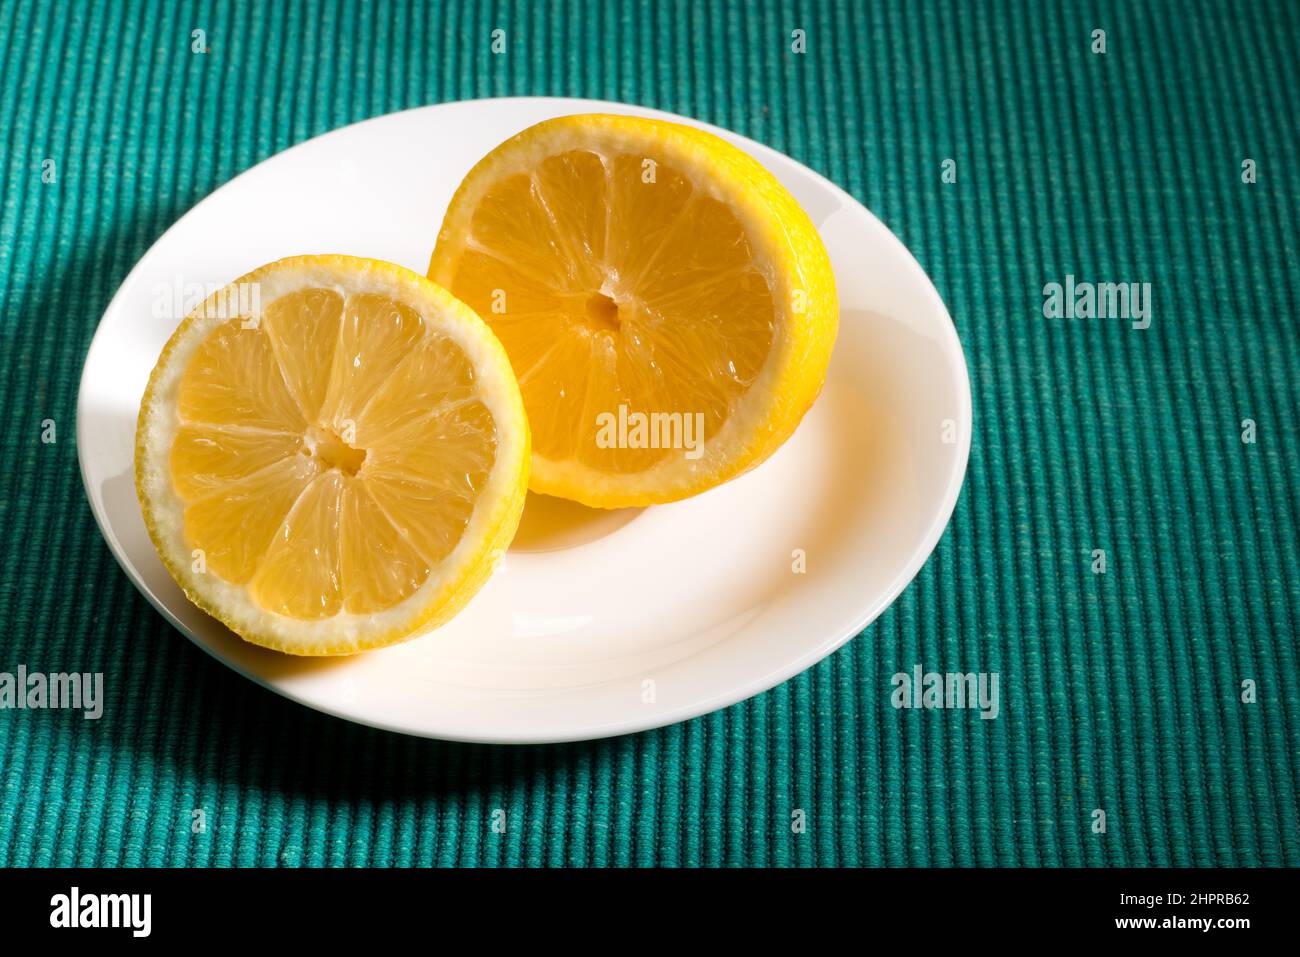 a juicy lemon cut apart on a plate on a green textile background, copy space, space for text layout Stock Photo